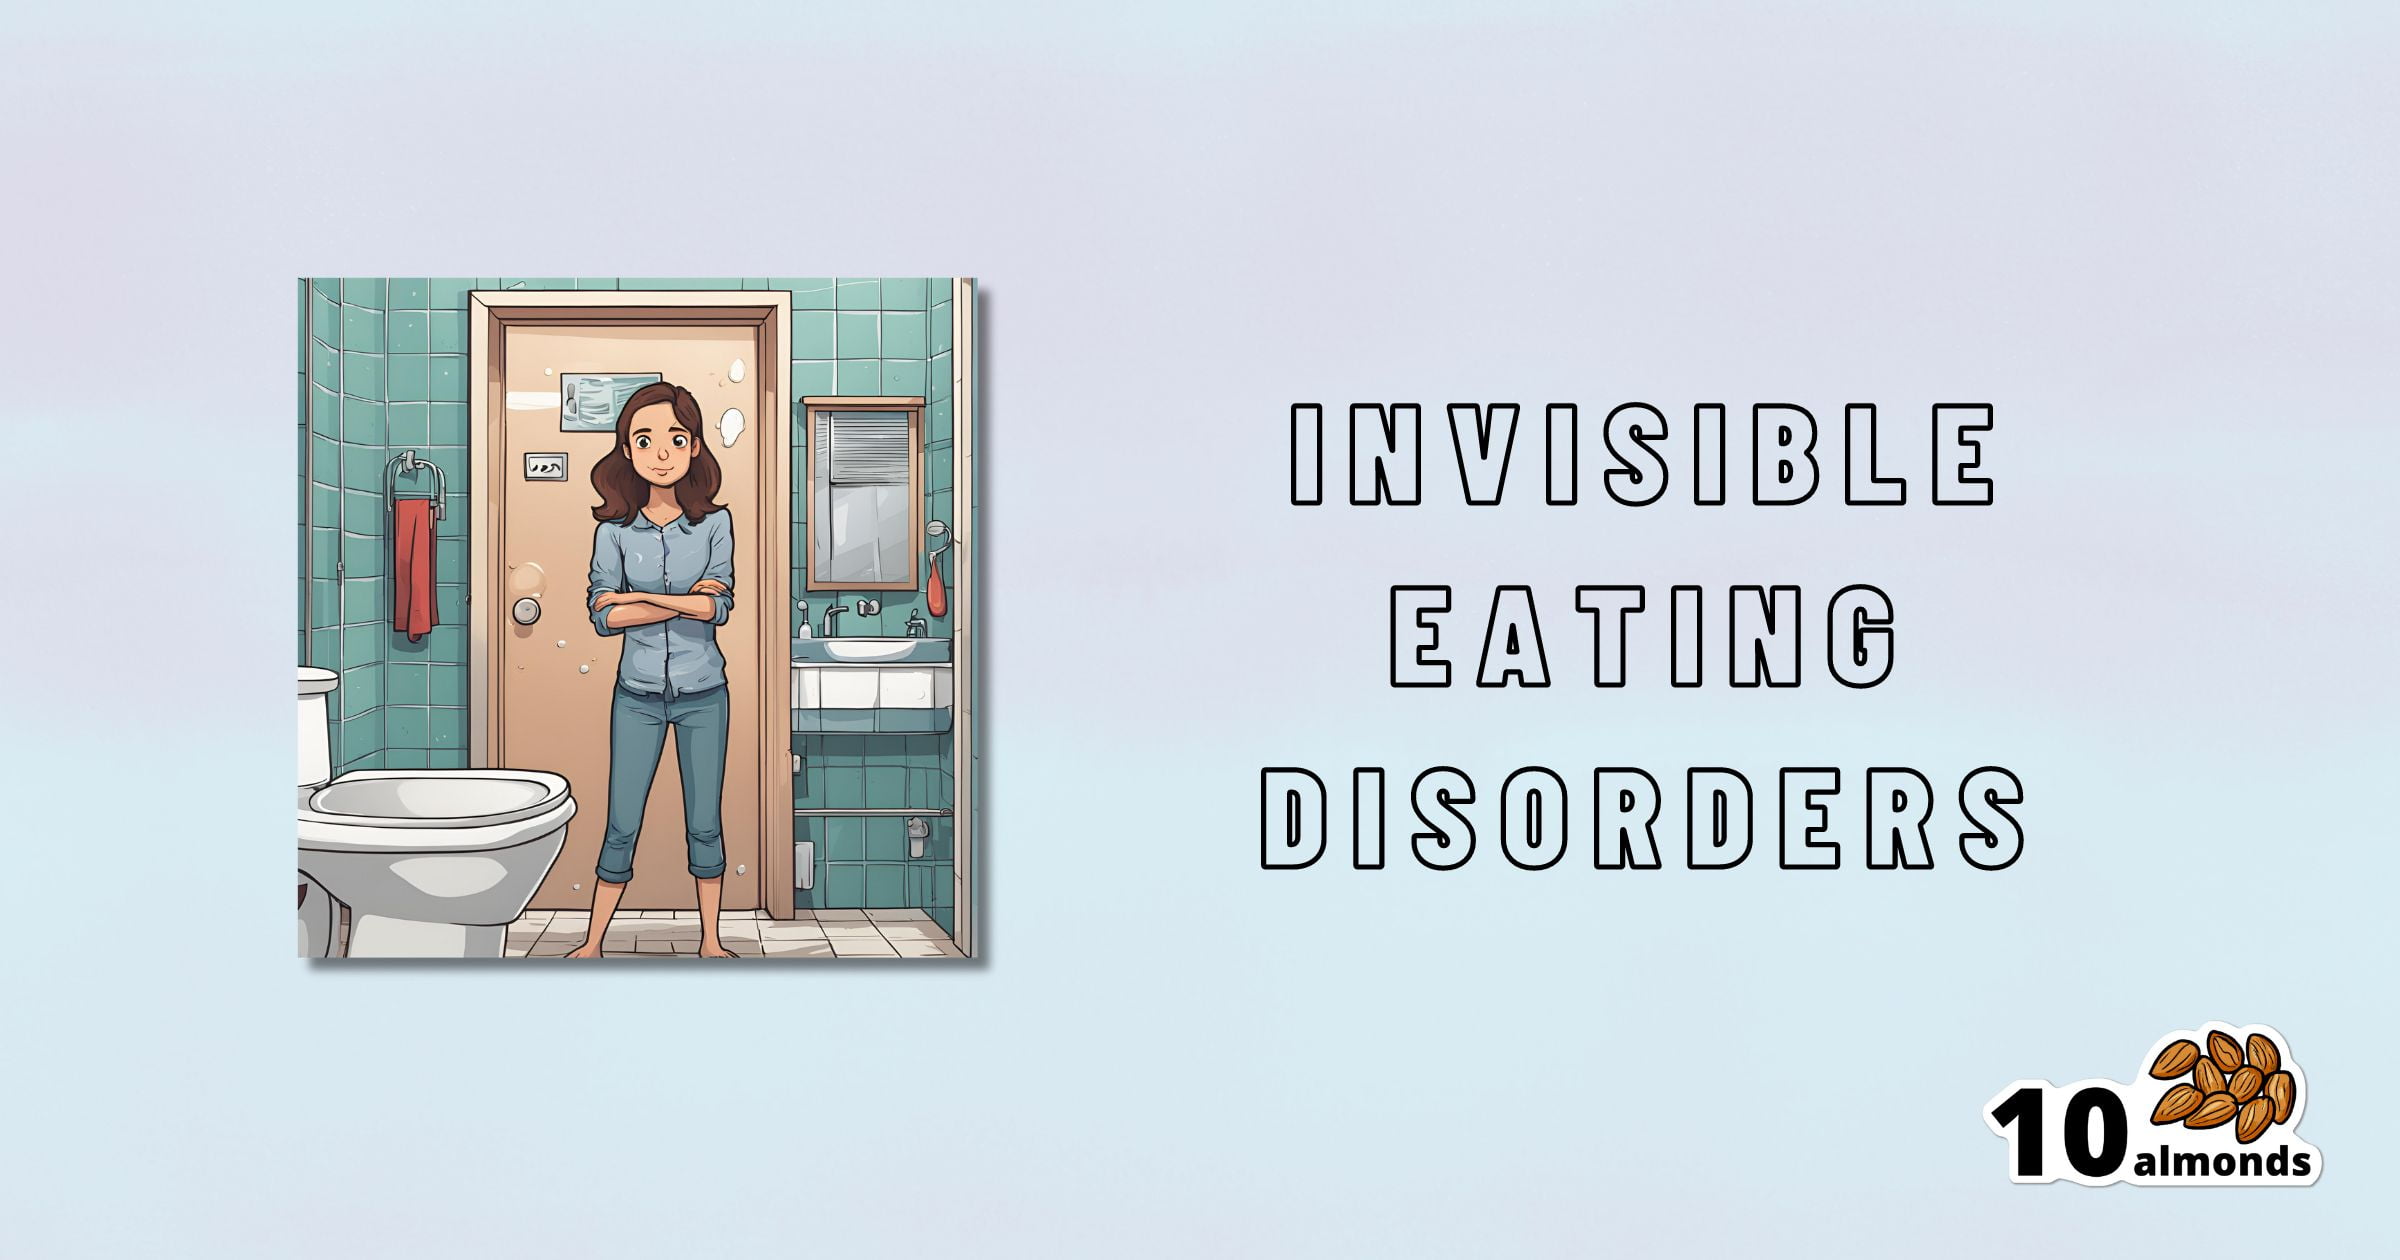 An illustration depicts a woman standing in a bathroom with folded arms, looking pensive. The tiled bathroom features a toilet and a mirror. The text next to her reads, “Invisible Eating Disorders.” A small logo at the bottom right corner shows “10 almonds.”